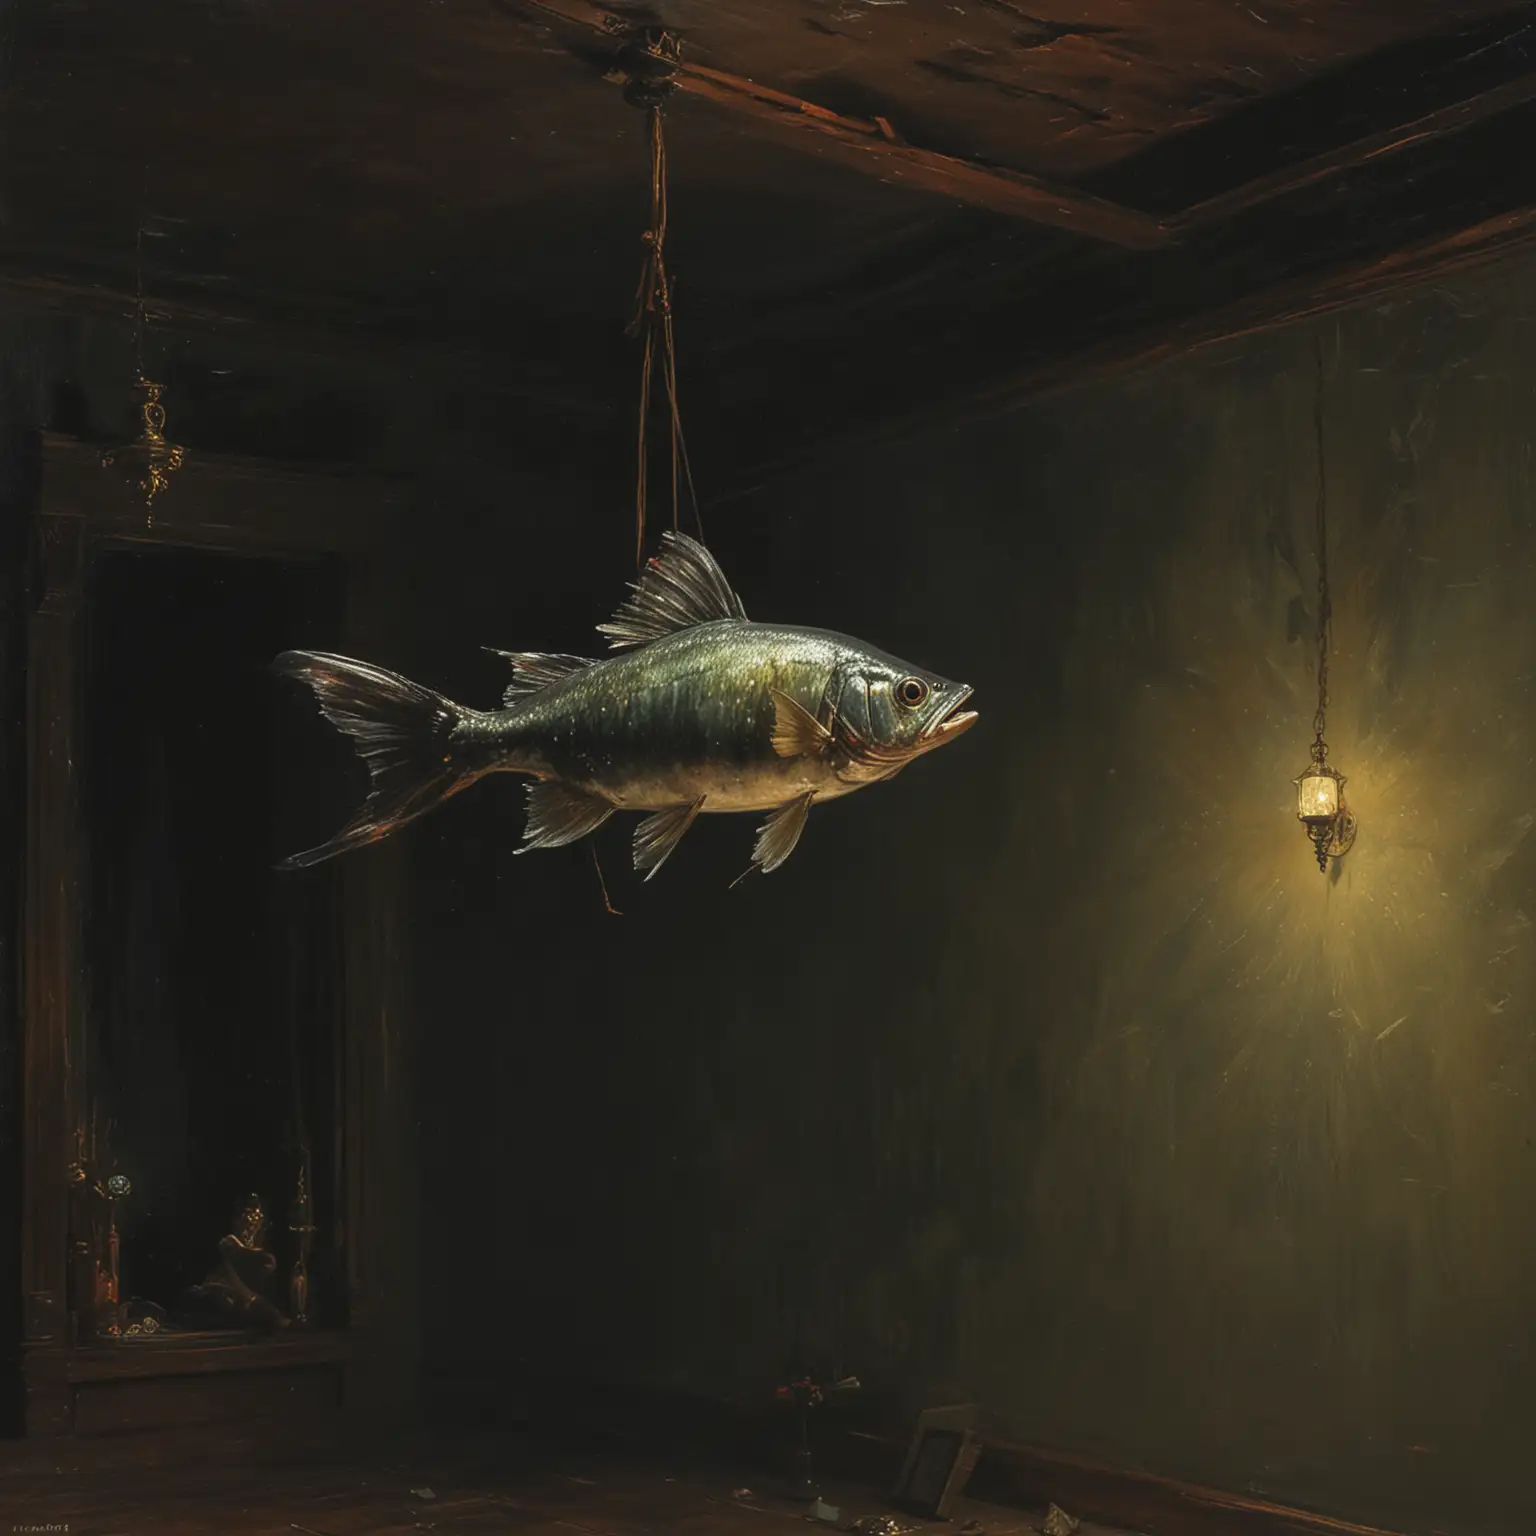 painting in oil by ilya repin about a flying fish in a dark room